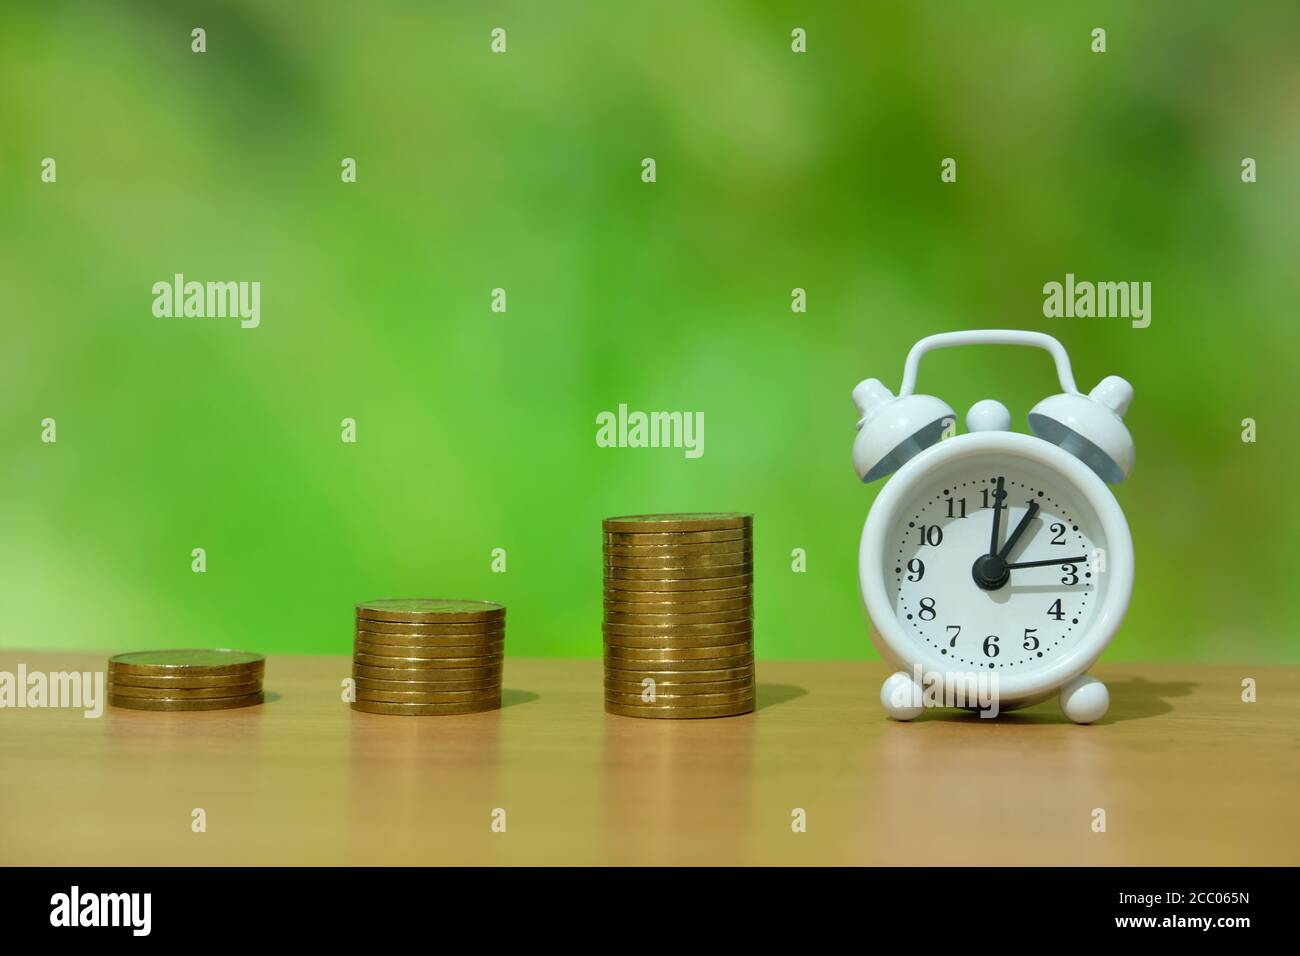 time is money concept - pile of money with white clock on a wooden table Stock Photo